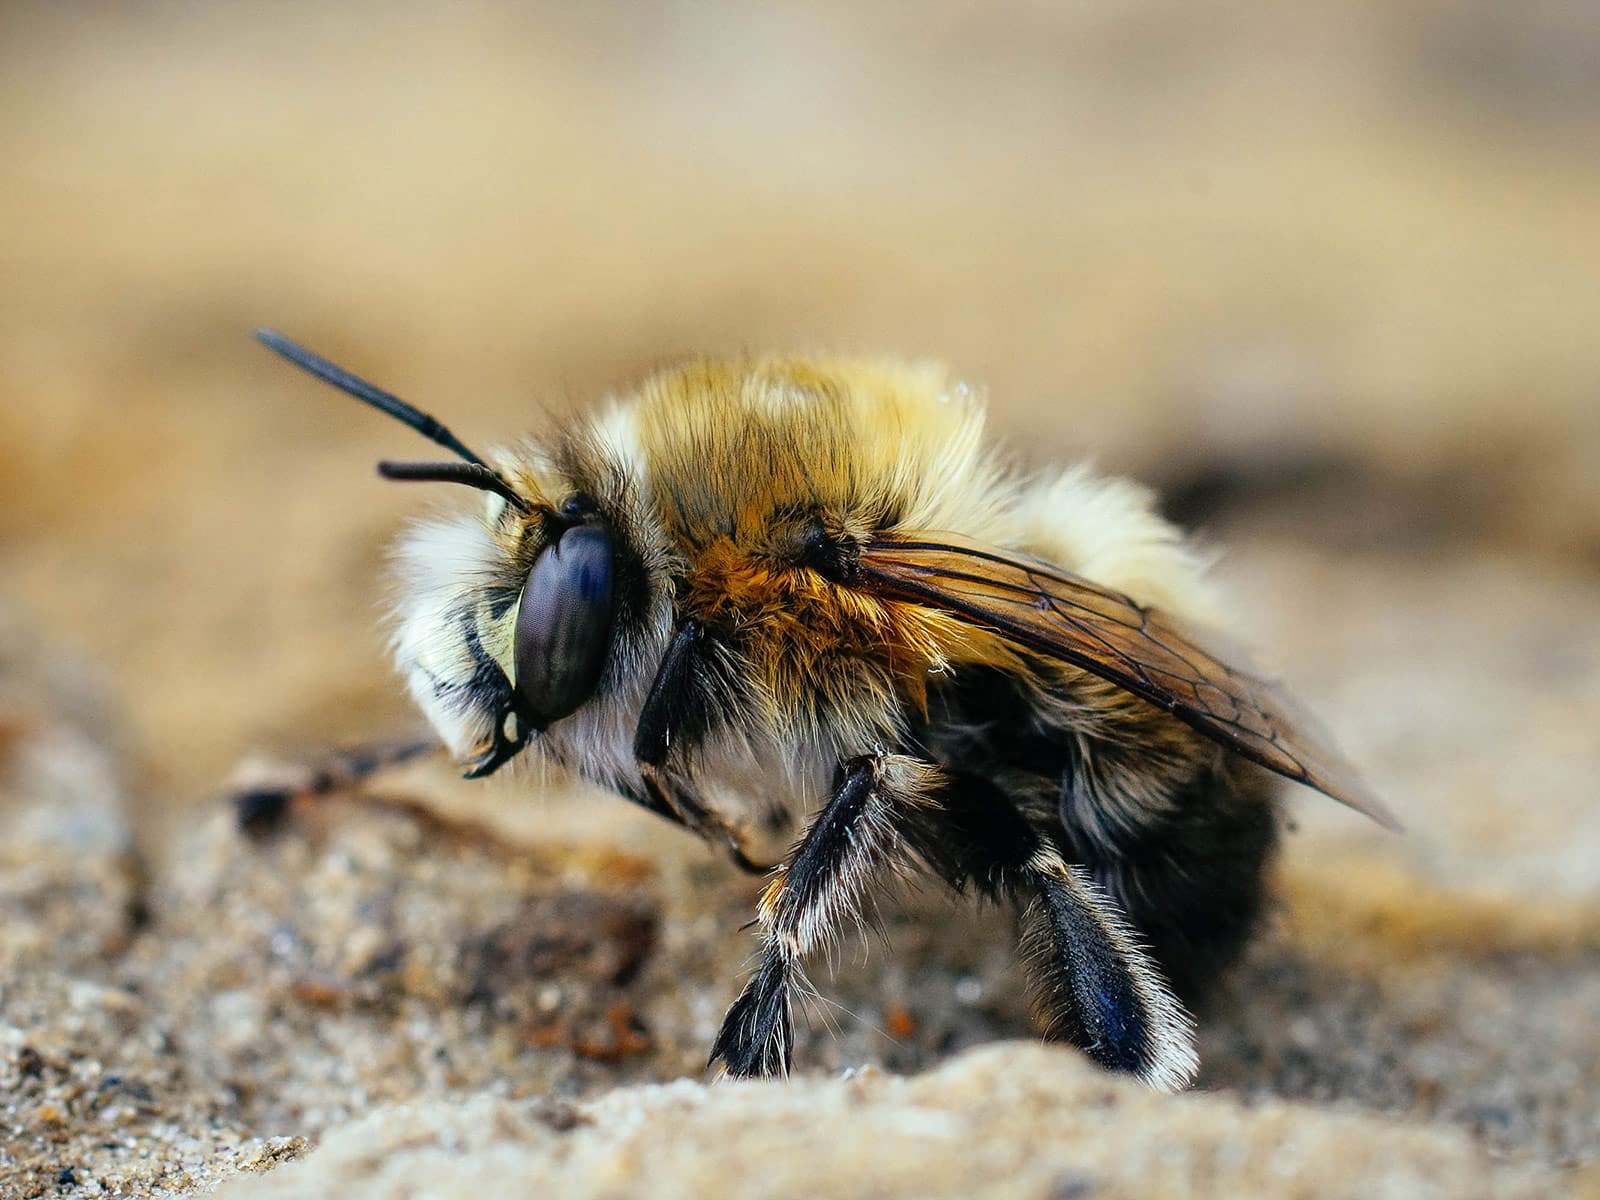 Hairy-Footed Flower Bees (Anthophora plumipes)